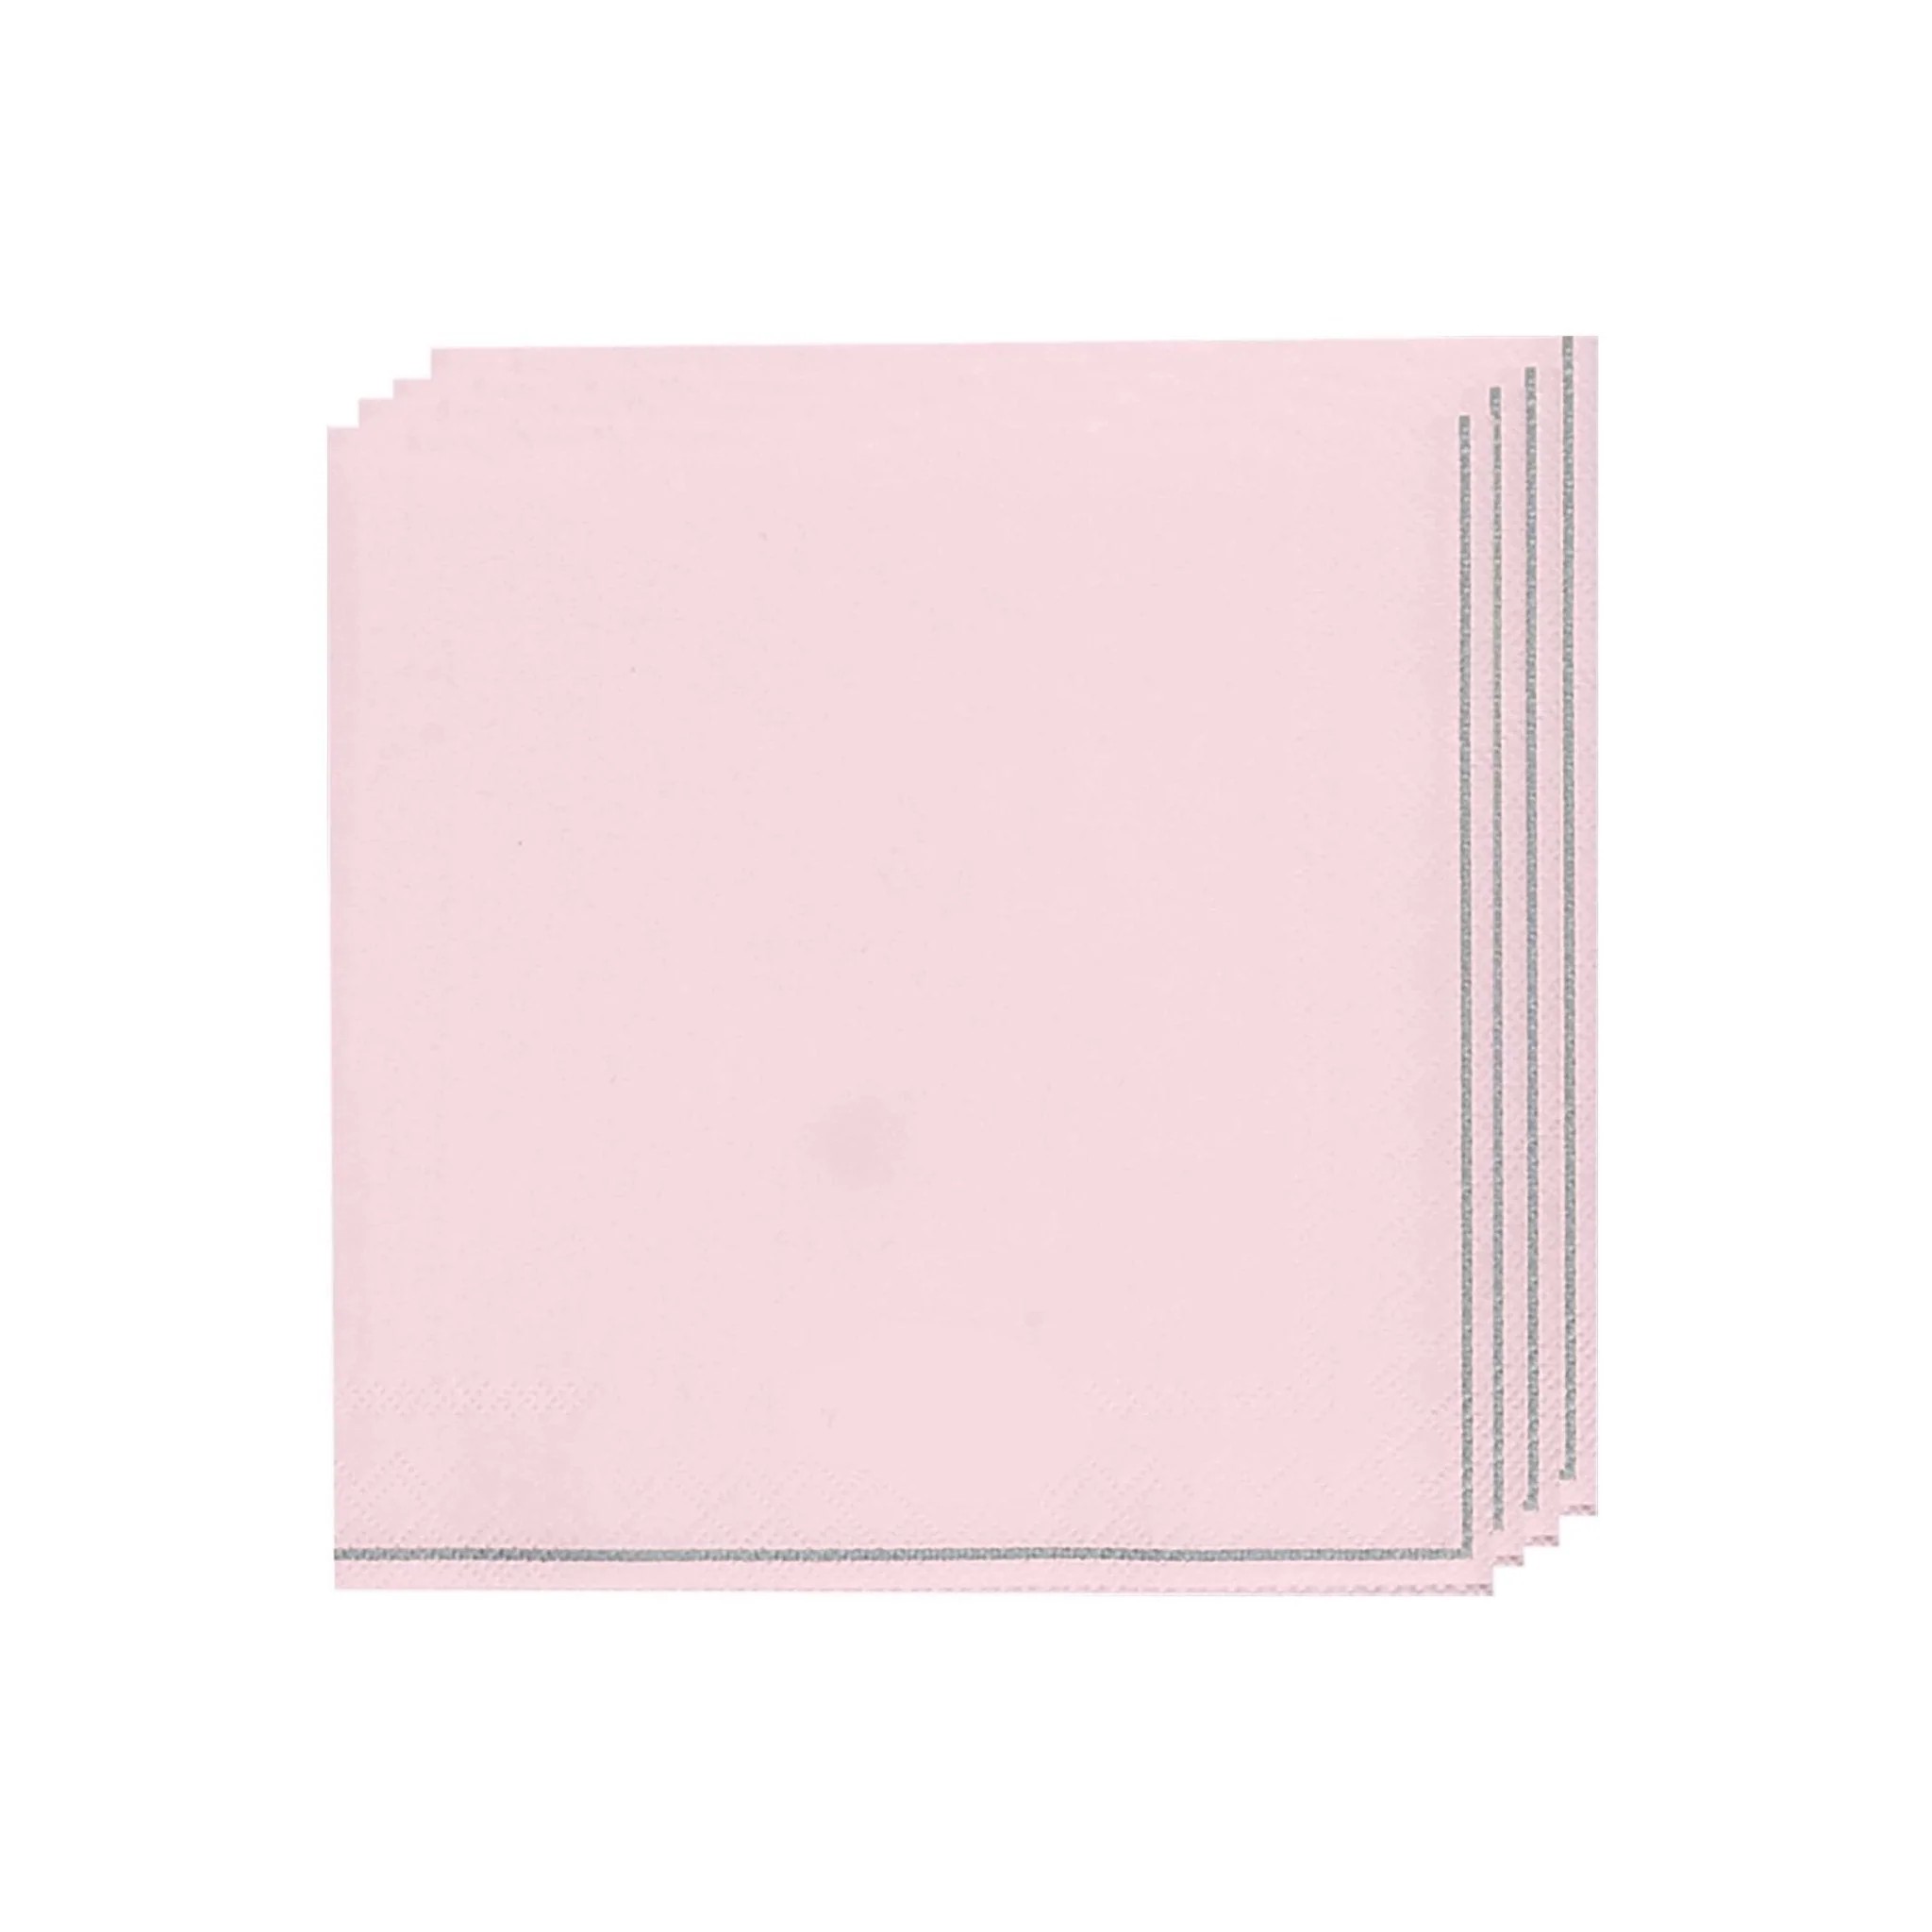 Luxe Party Blush with Silver Stripe Lunch Napkins - 20 pcs